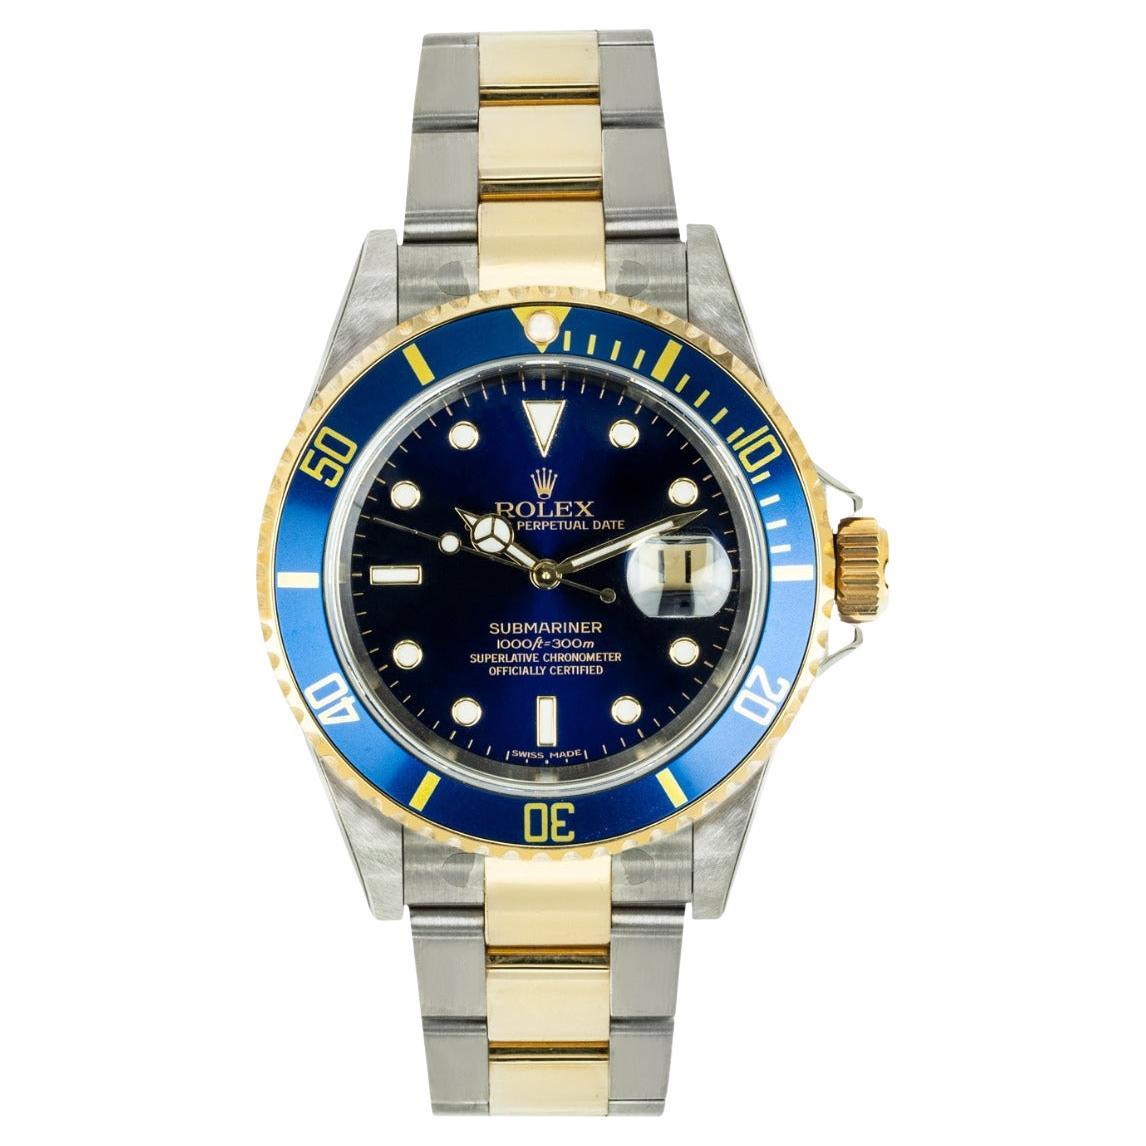 Rolex Submariner Date NOS Stainless Steel & Yellow Gold Blue Dial 16613 For Sale